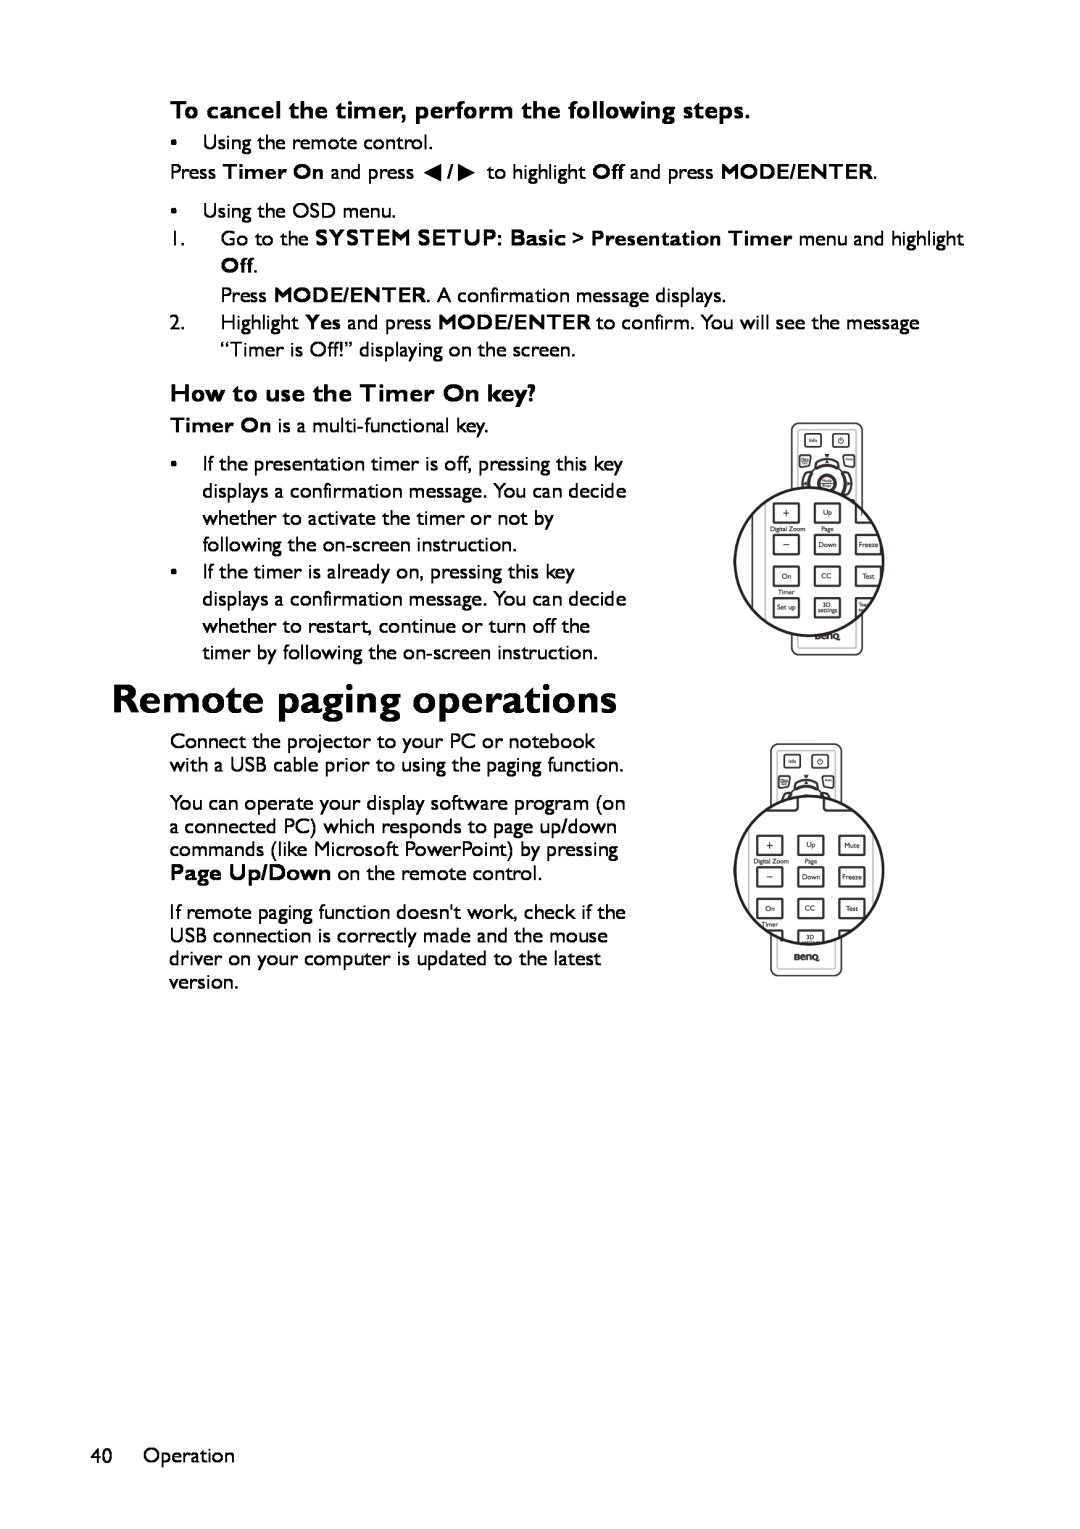 BenQ MS517 Remote paging operations, To cancel the timer, perform the following steps, How to use the Timer On key? 